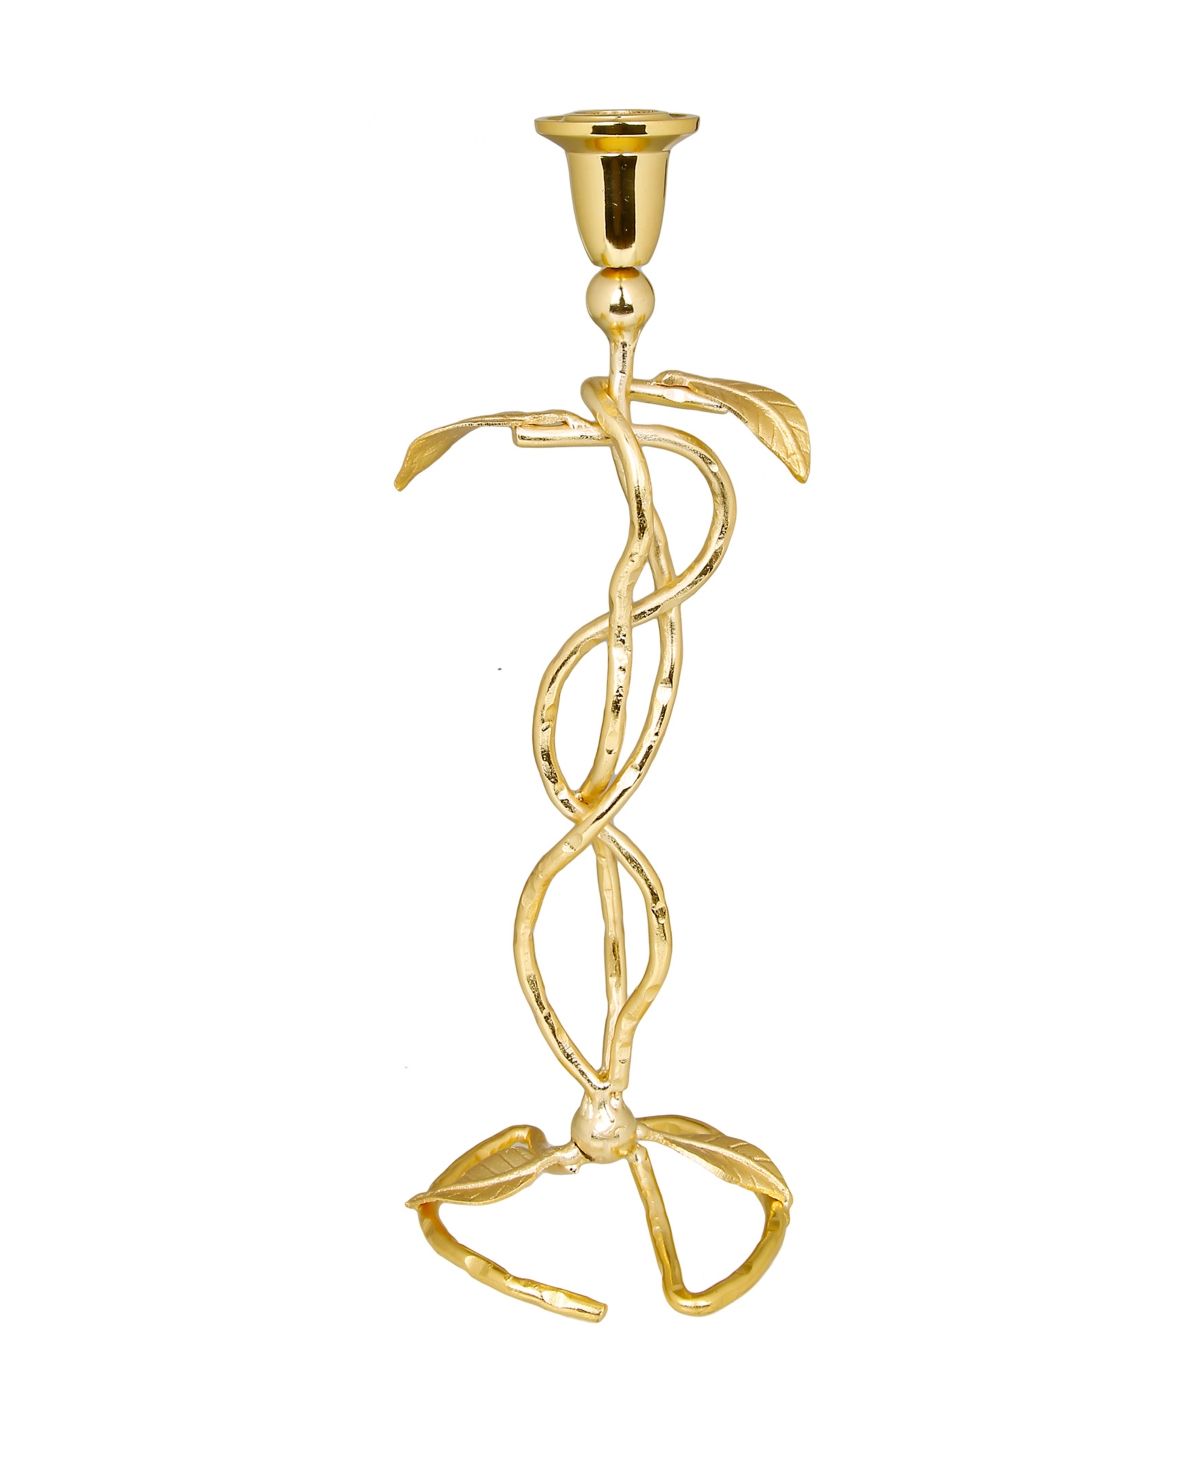 Classic Touch Gold Leaf Designed 12.5" Tall Candlestick | Macys (US)